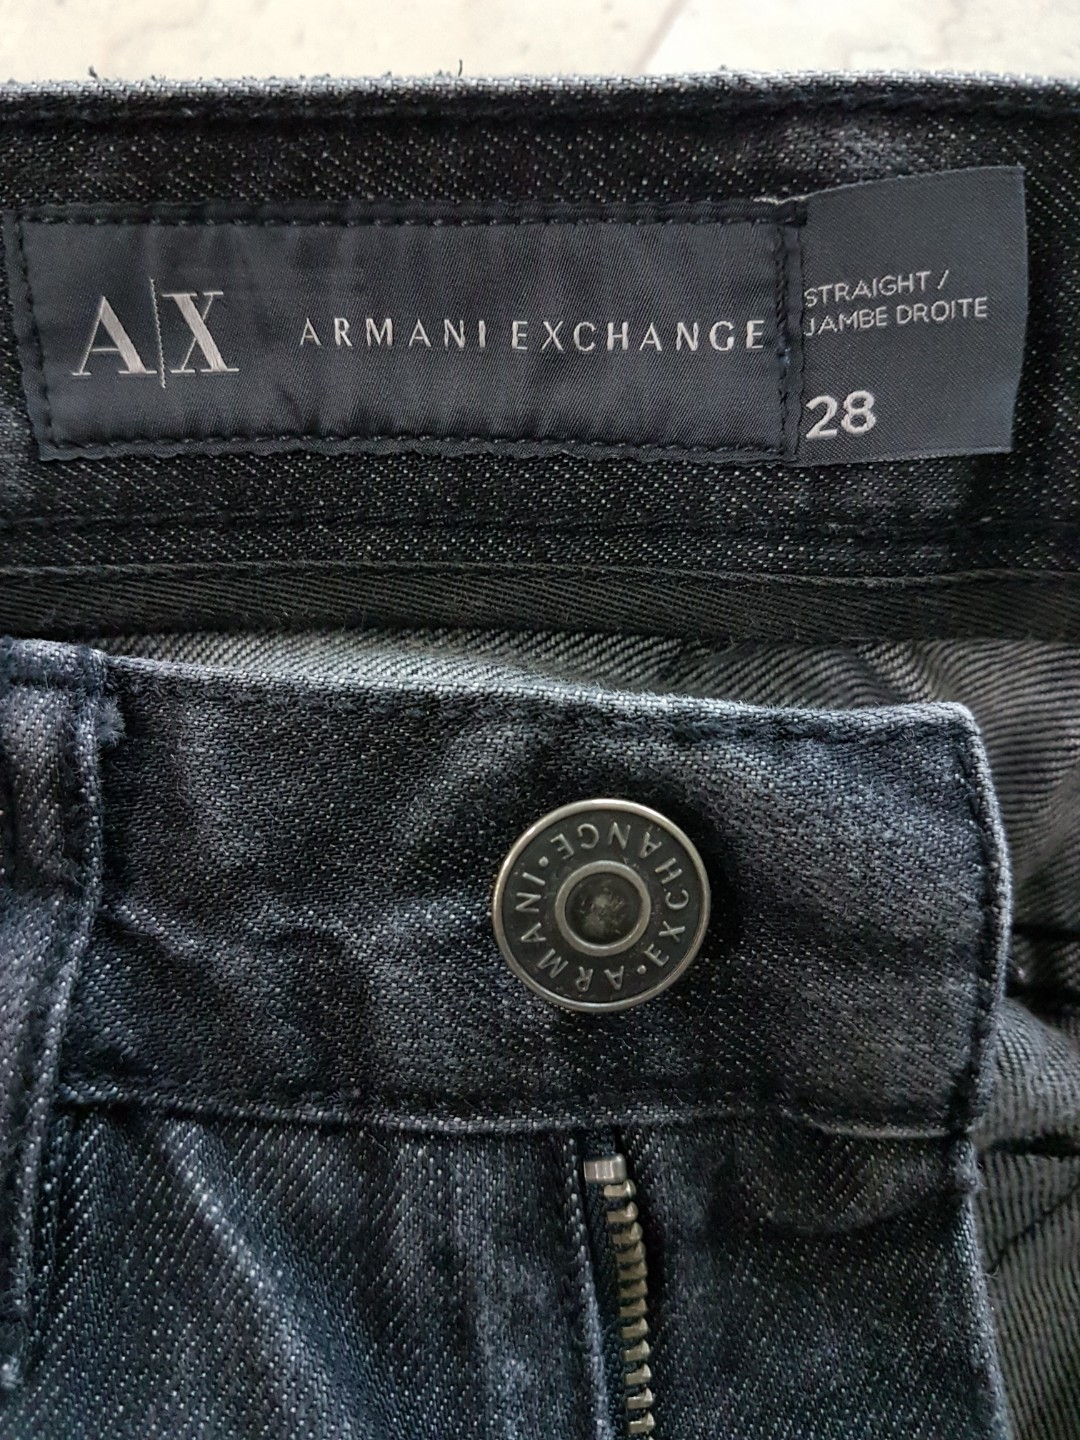 ax jeans